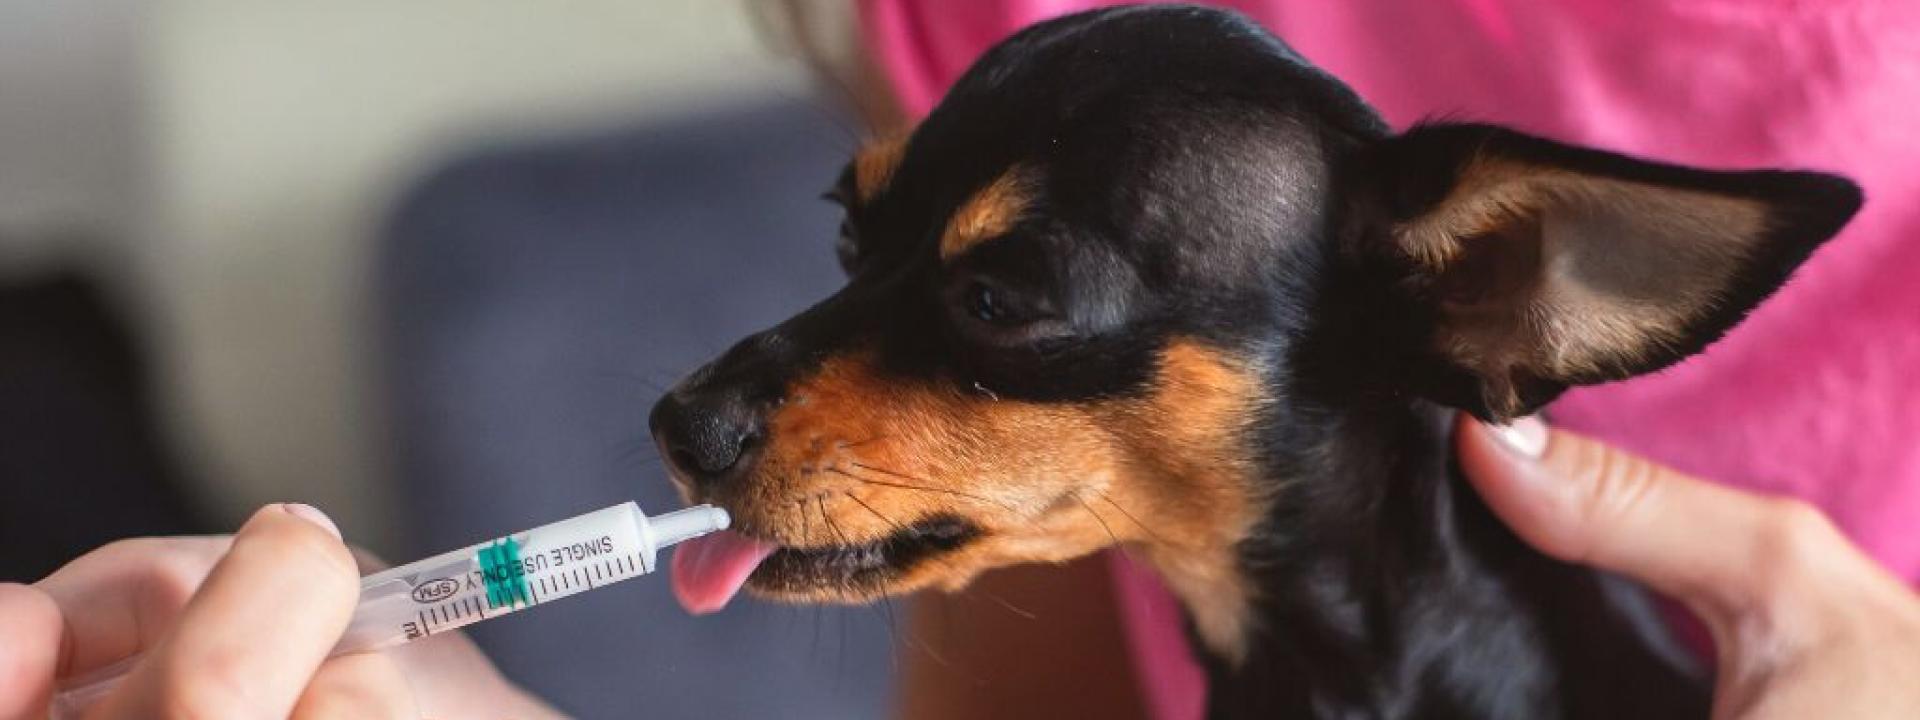 Process of giving a medicine injection to a small breed dog with a syringe